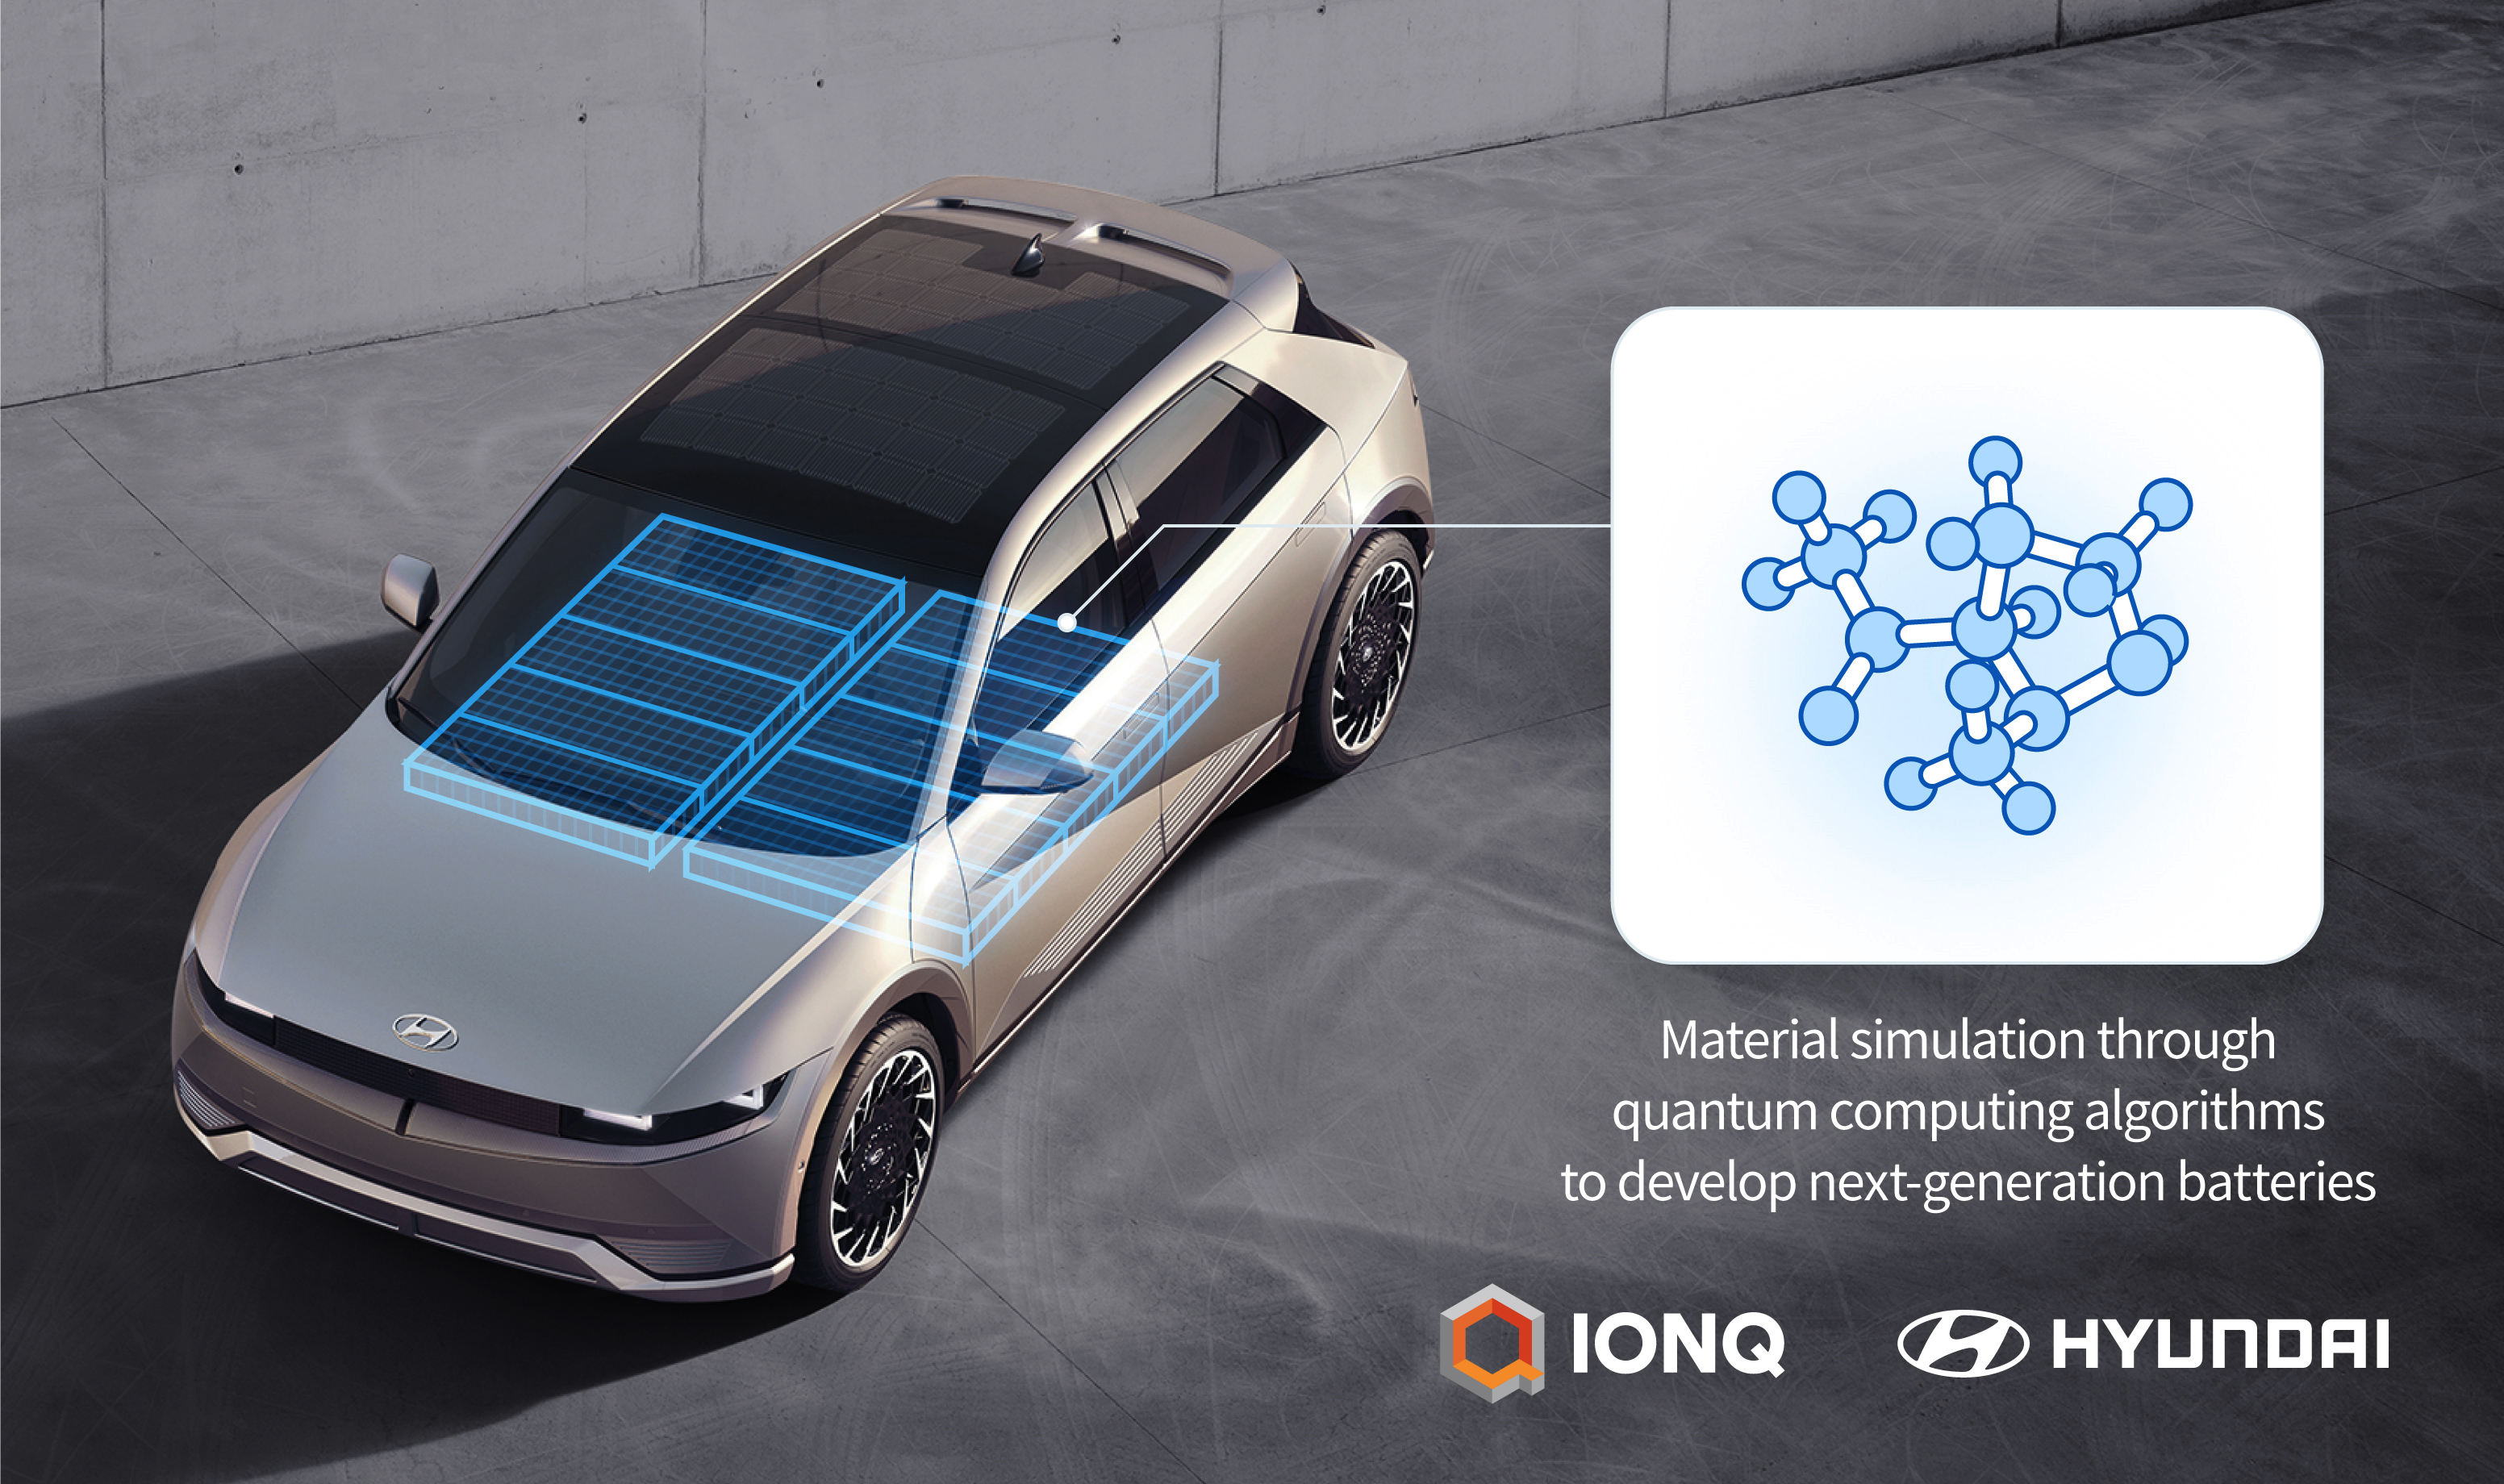 IonQ in partnership with Hyundai. Material simulation through quantum computing algorithms to develop next-generation batteries.